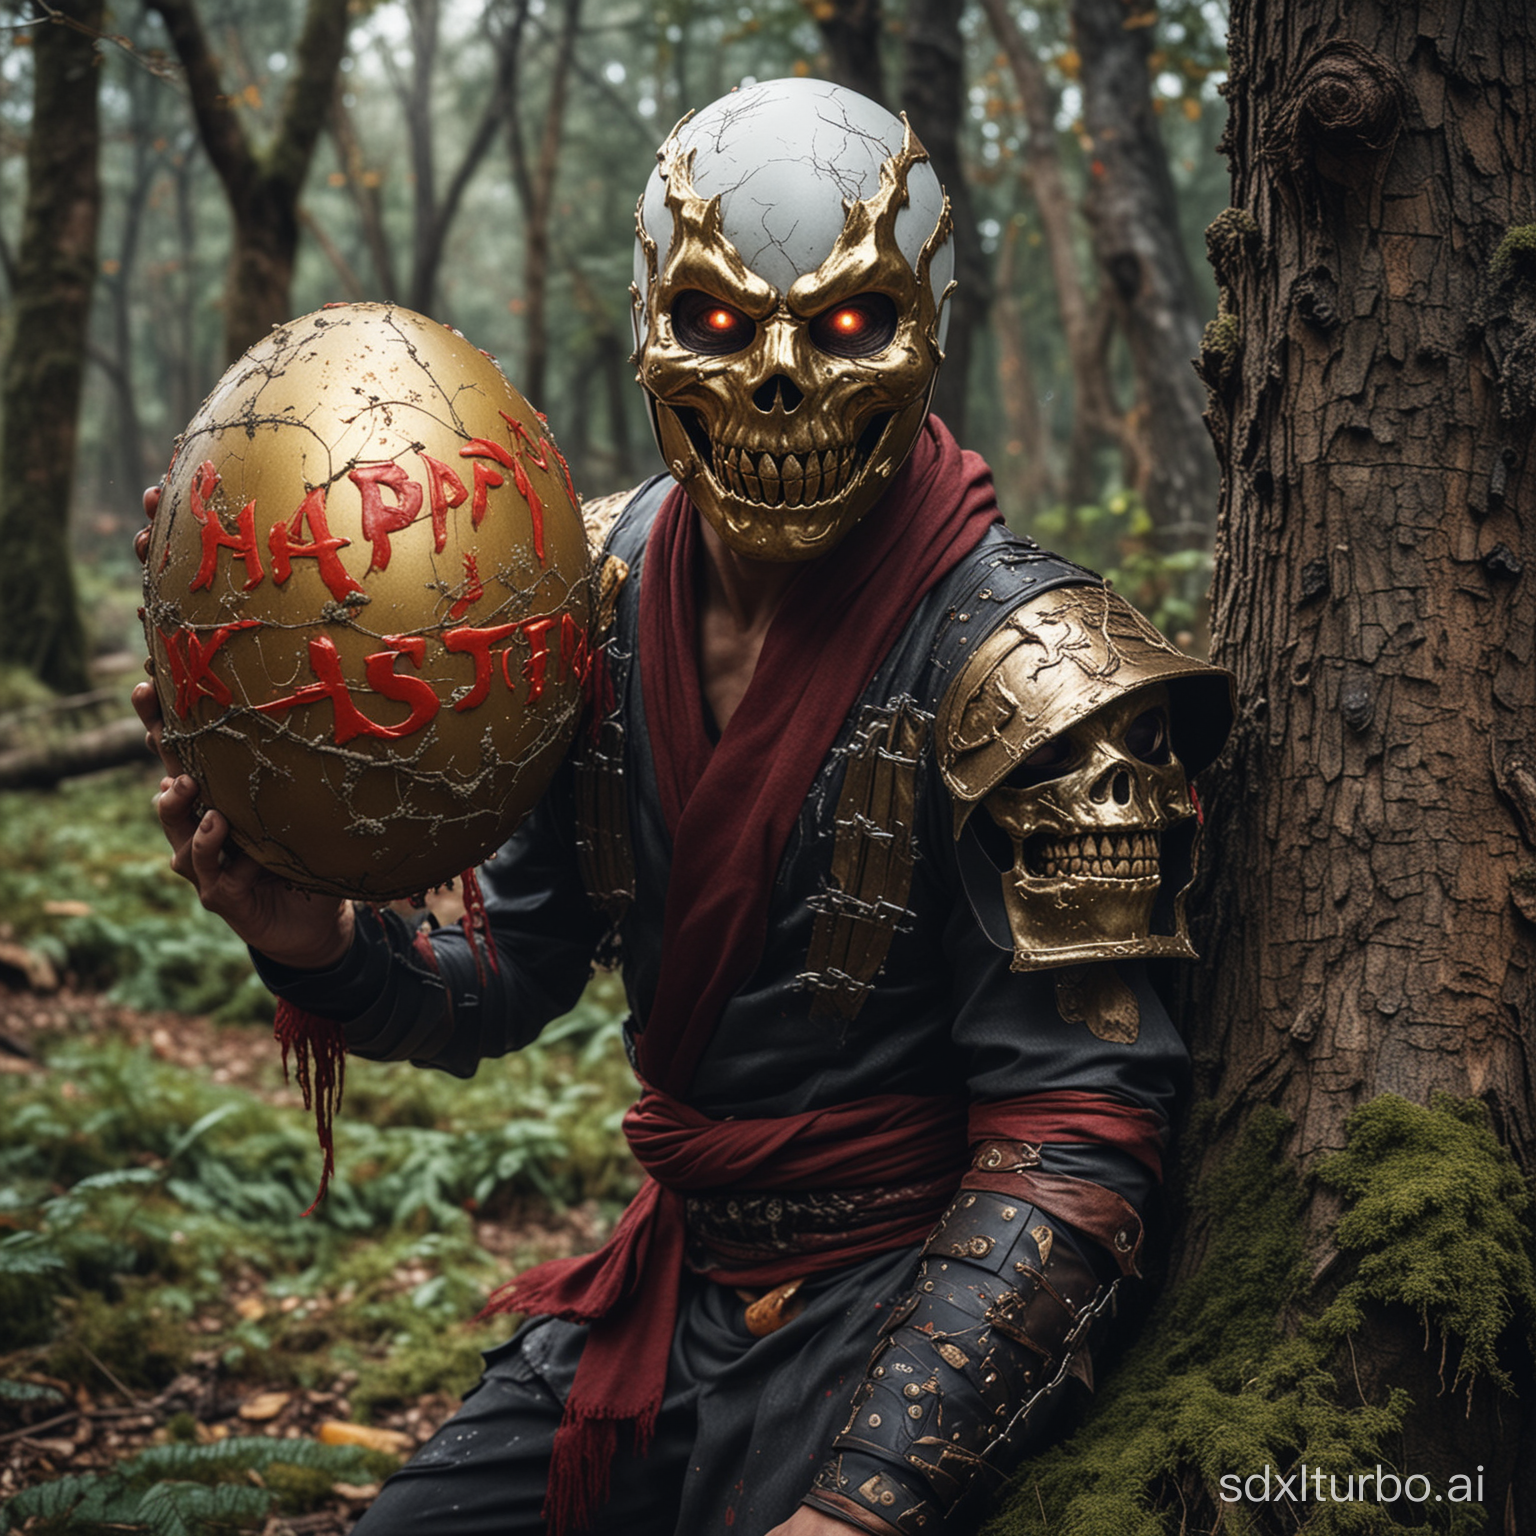 a sign says: "HAPPY EASTER by @MK_XTRA"!  an asian warrior who looks like a golden mortal kombat ninja with mask, golden shoes, white eyes. darkred scarf. he is hiding behind a tree with big colorful egg. he has wet, bloody arms. skull on waistbelt. he wears cracked, ornamented, reflective material. sees a big scary wounded rabbit looking for him. trees have scary looking faces with teeth. funny mood. moss. ultra detailed image quality. cinematic lightning. portrait, hdr. 
